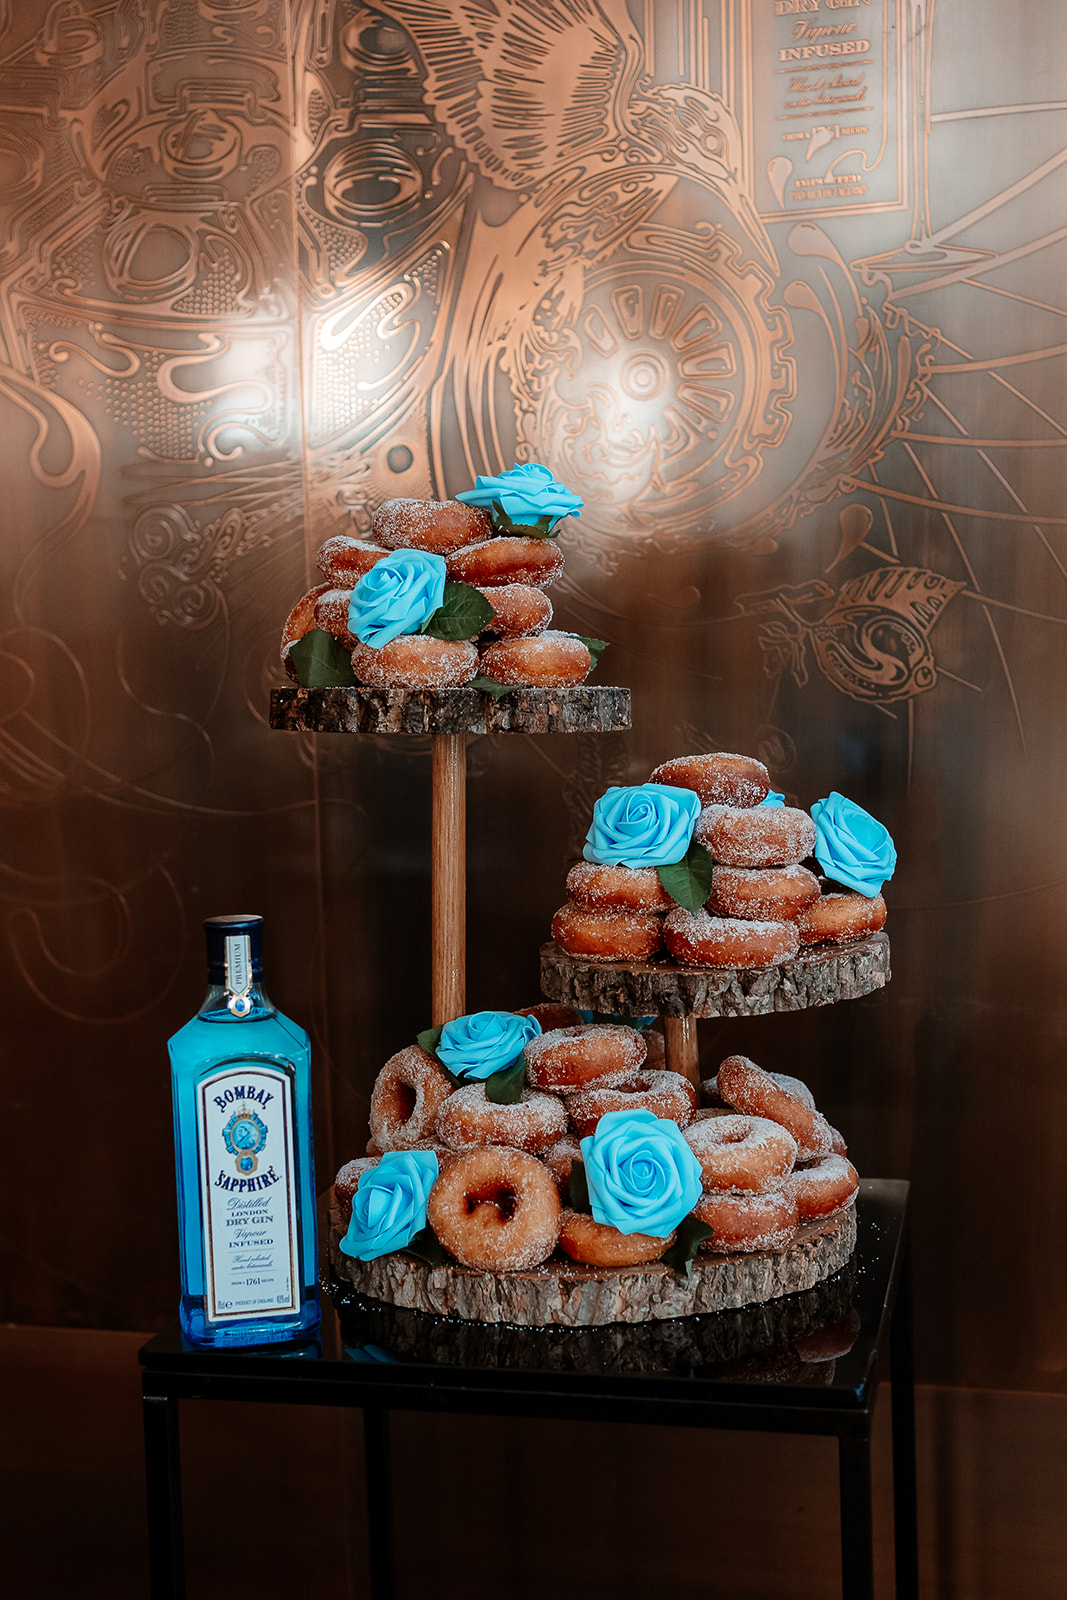 A tower of sugar covered ring doughnuts decorated with blue icing sugar roses sits on a three tier wooden cake stand.